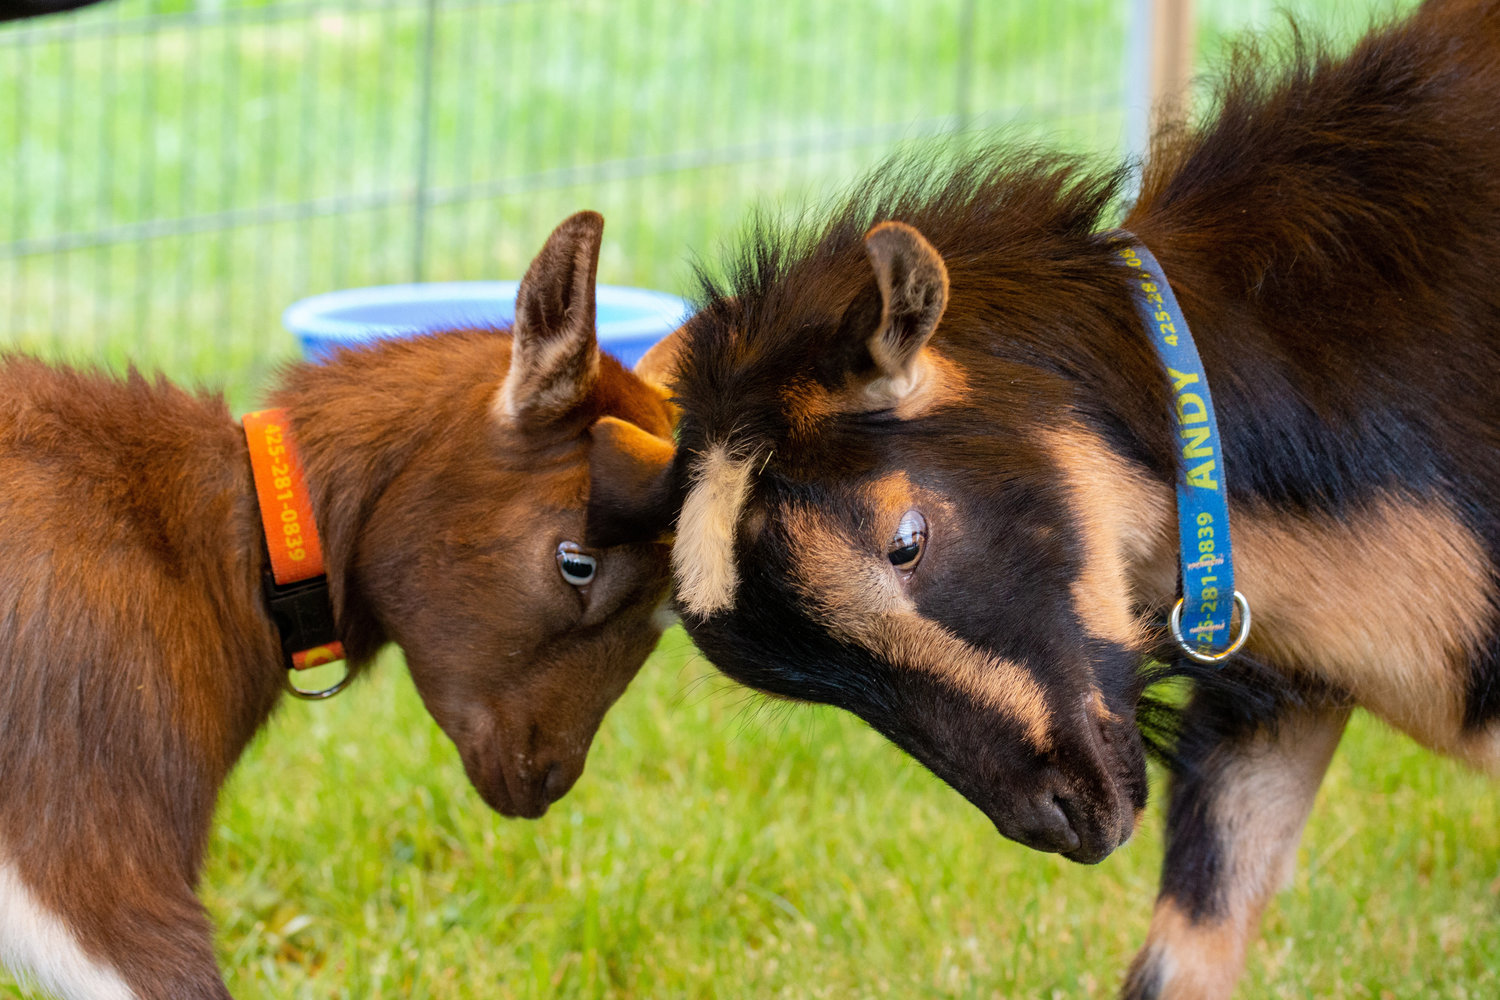 Two goats playfully butt heads at the petting zoo at the Centralia College SpringFest Tuesday afternoon.